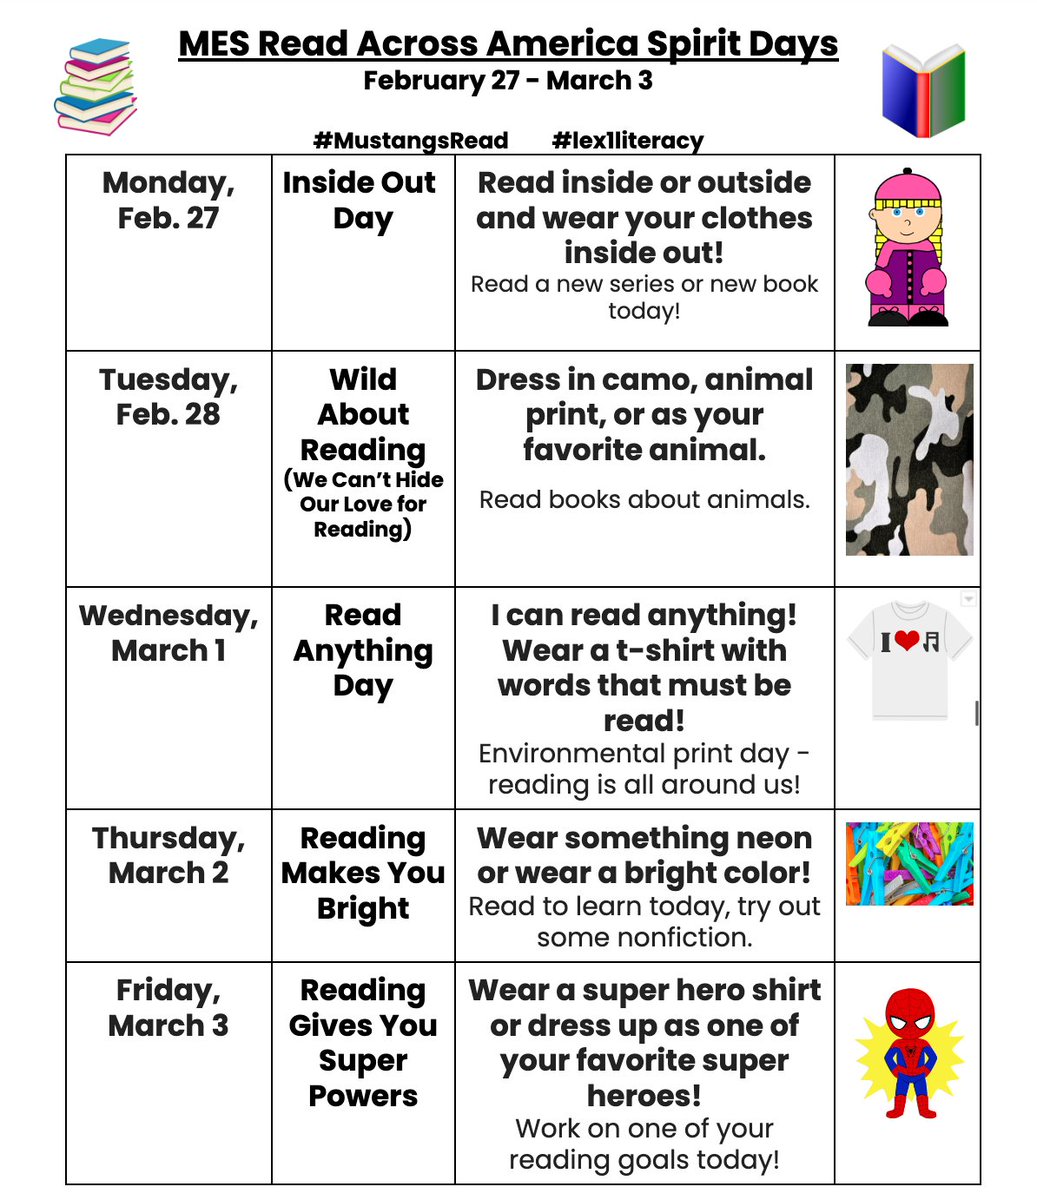 Our @Midway_Mustangs are ready for Read Across America week! We look forward to lots of excitement around reading! #MustangsRead #Lex1Literacy